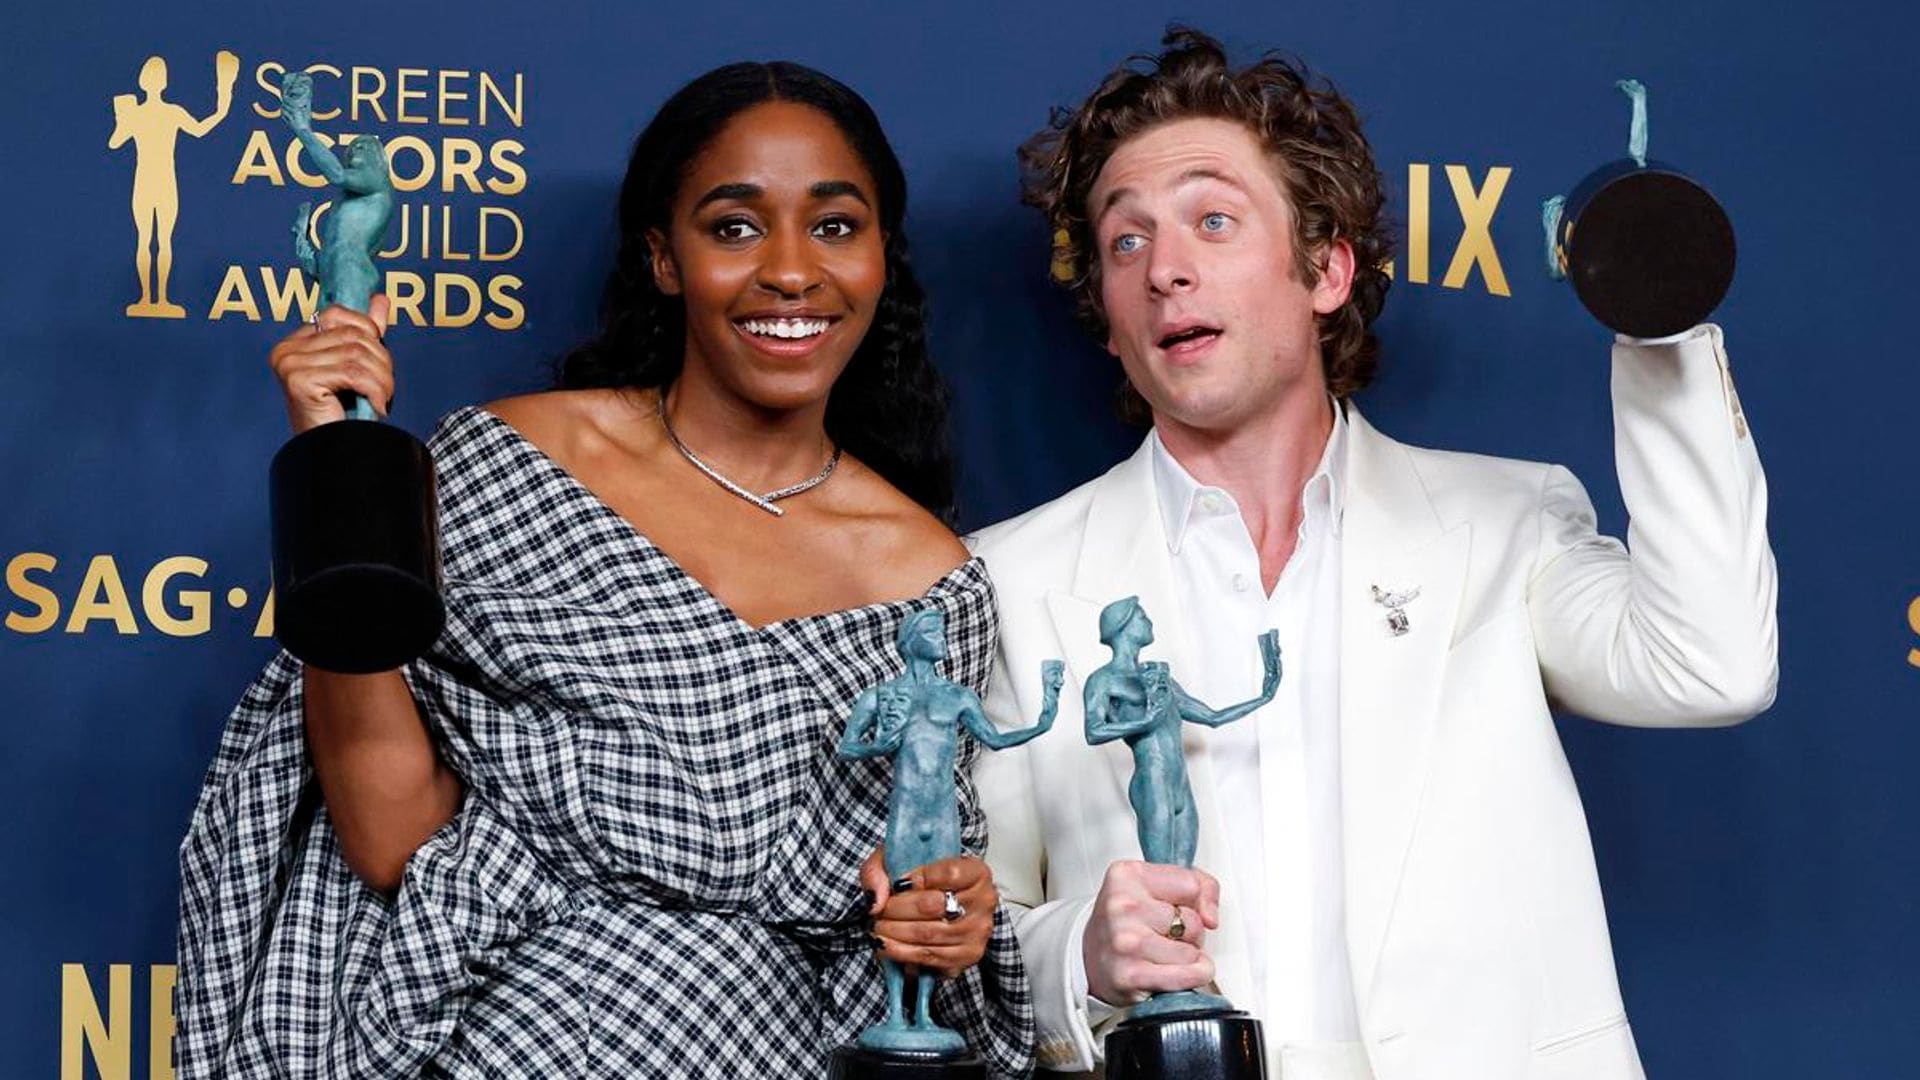 Why people think Jeremy Allen White and Ayo Edebiri are dating